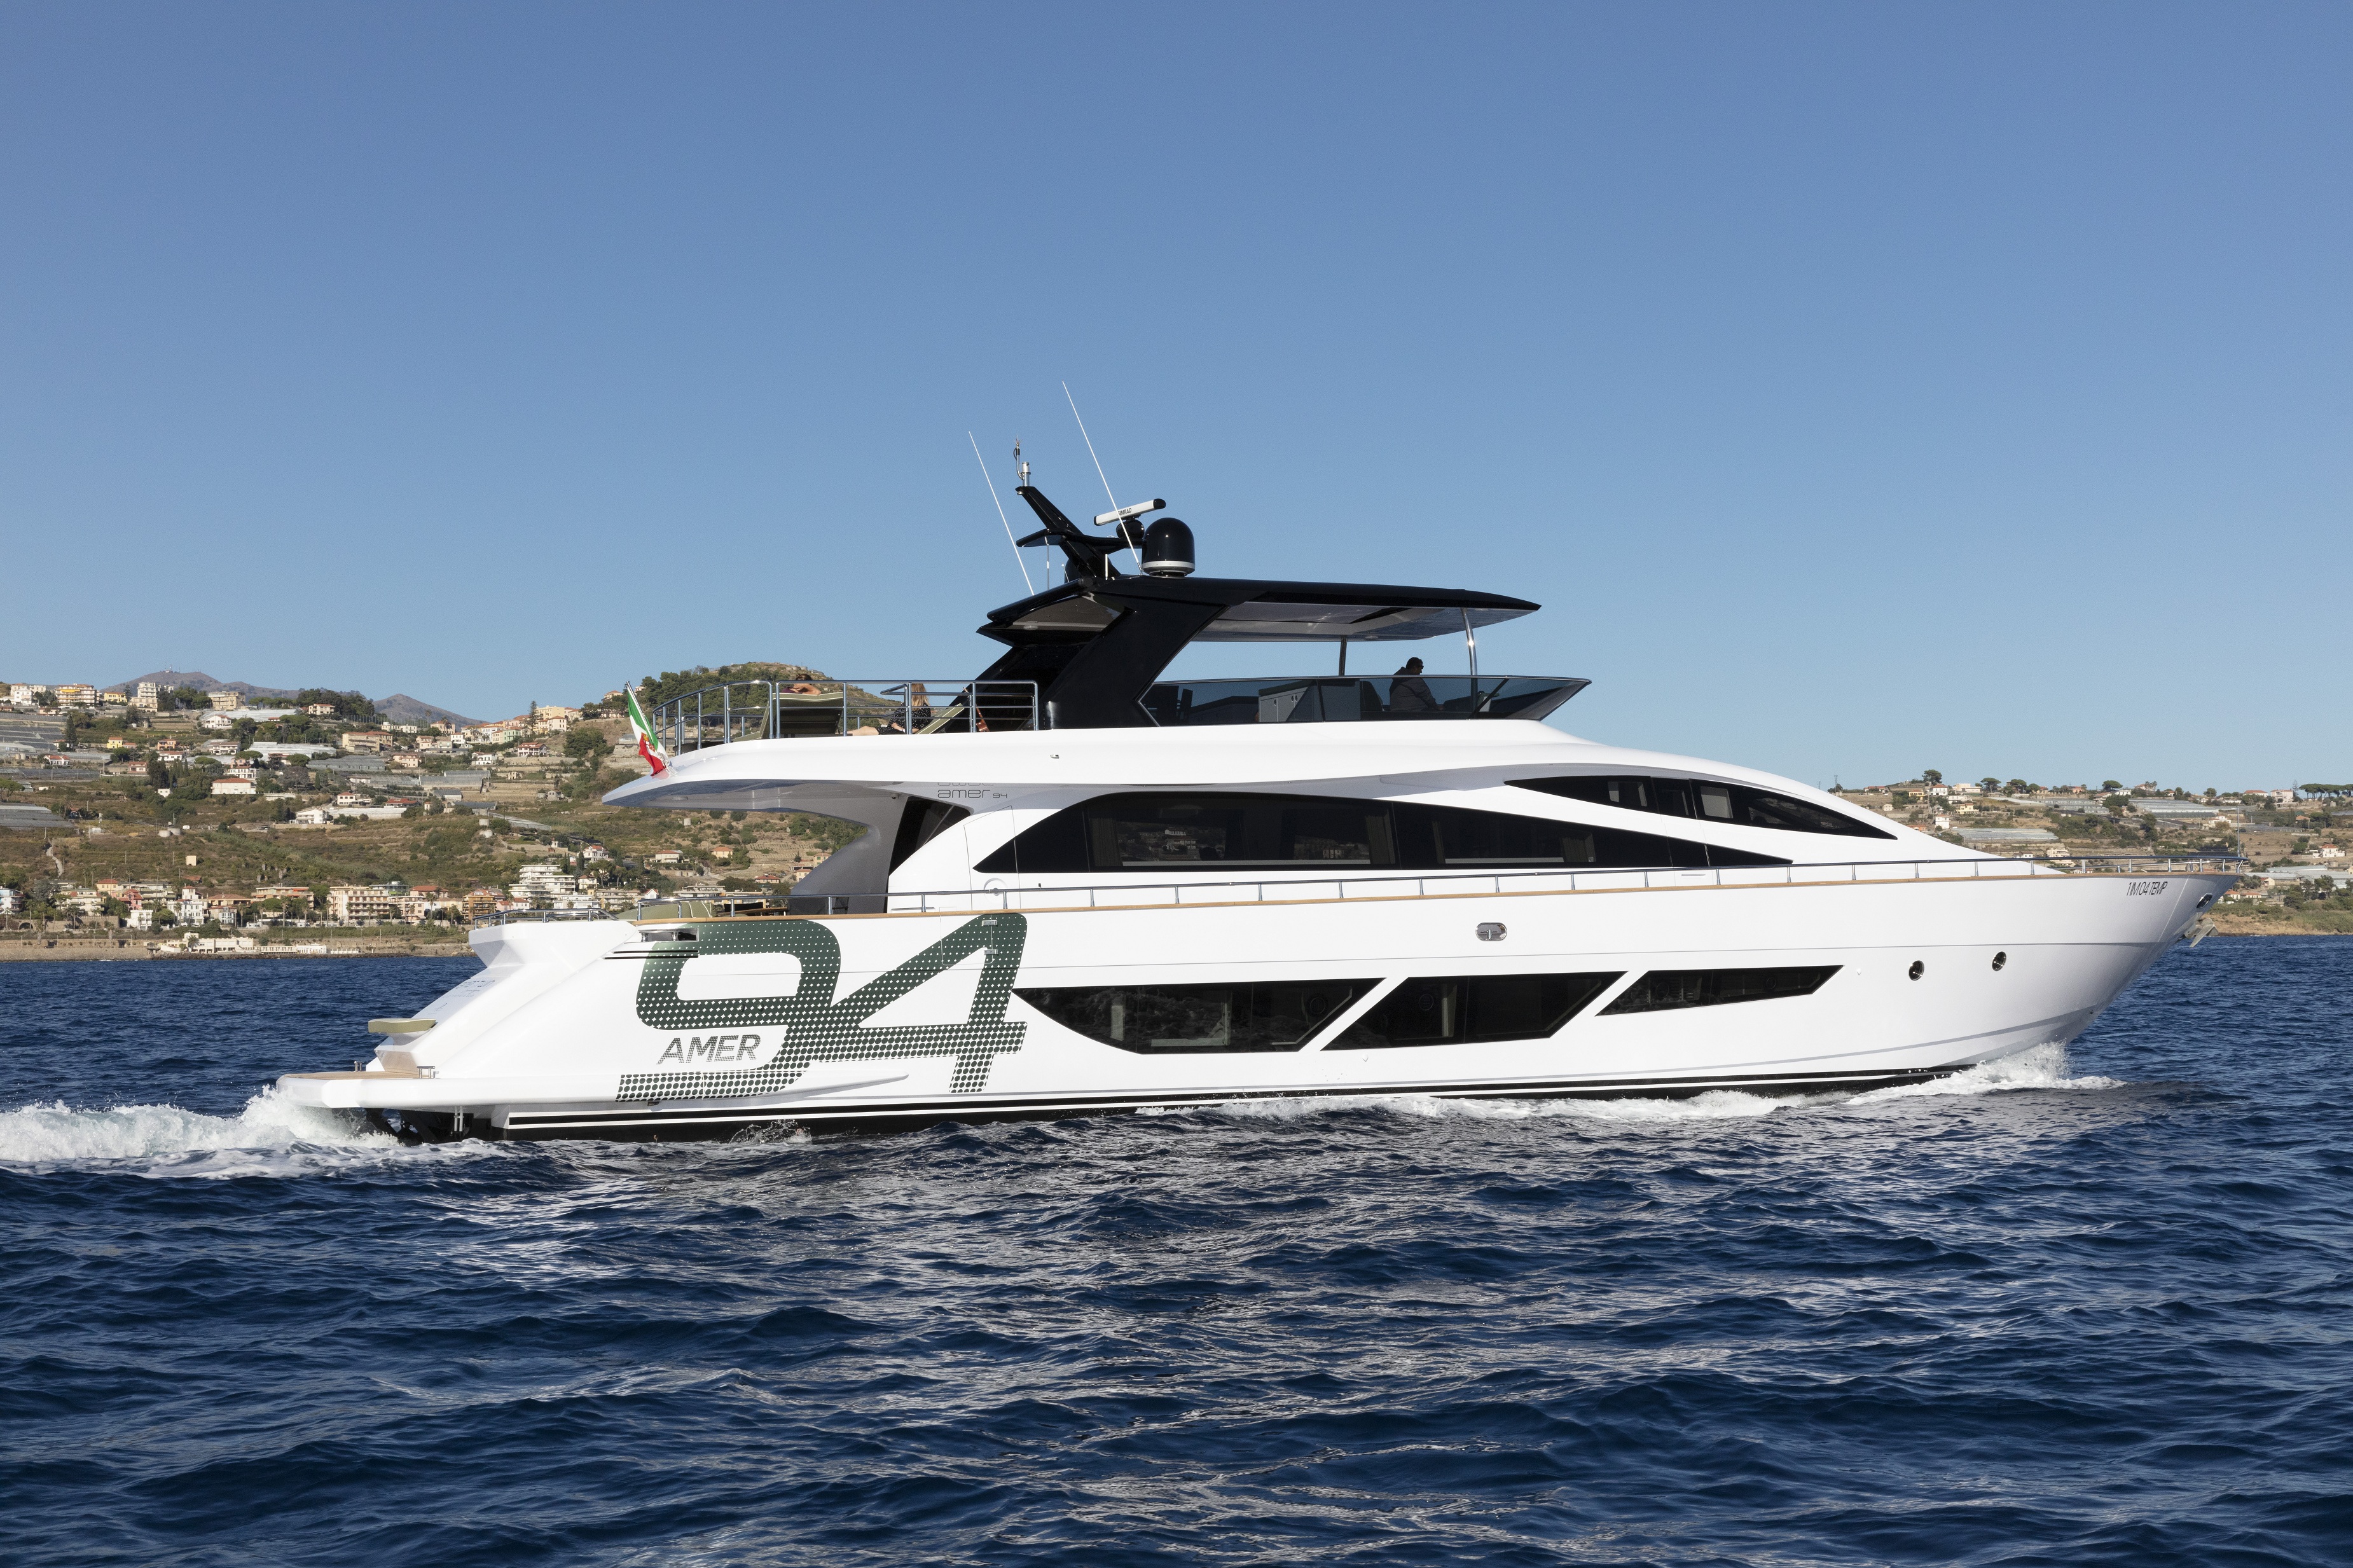 Amer Twin 94 Sistership To Motor Yacht D'ARIA